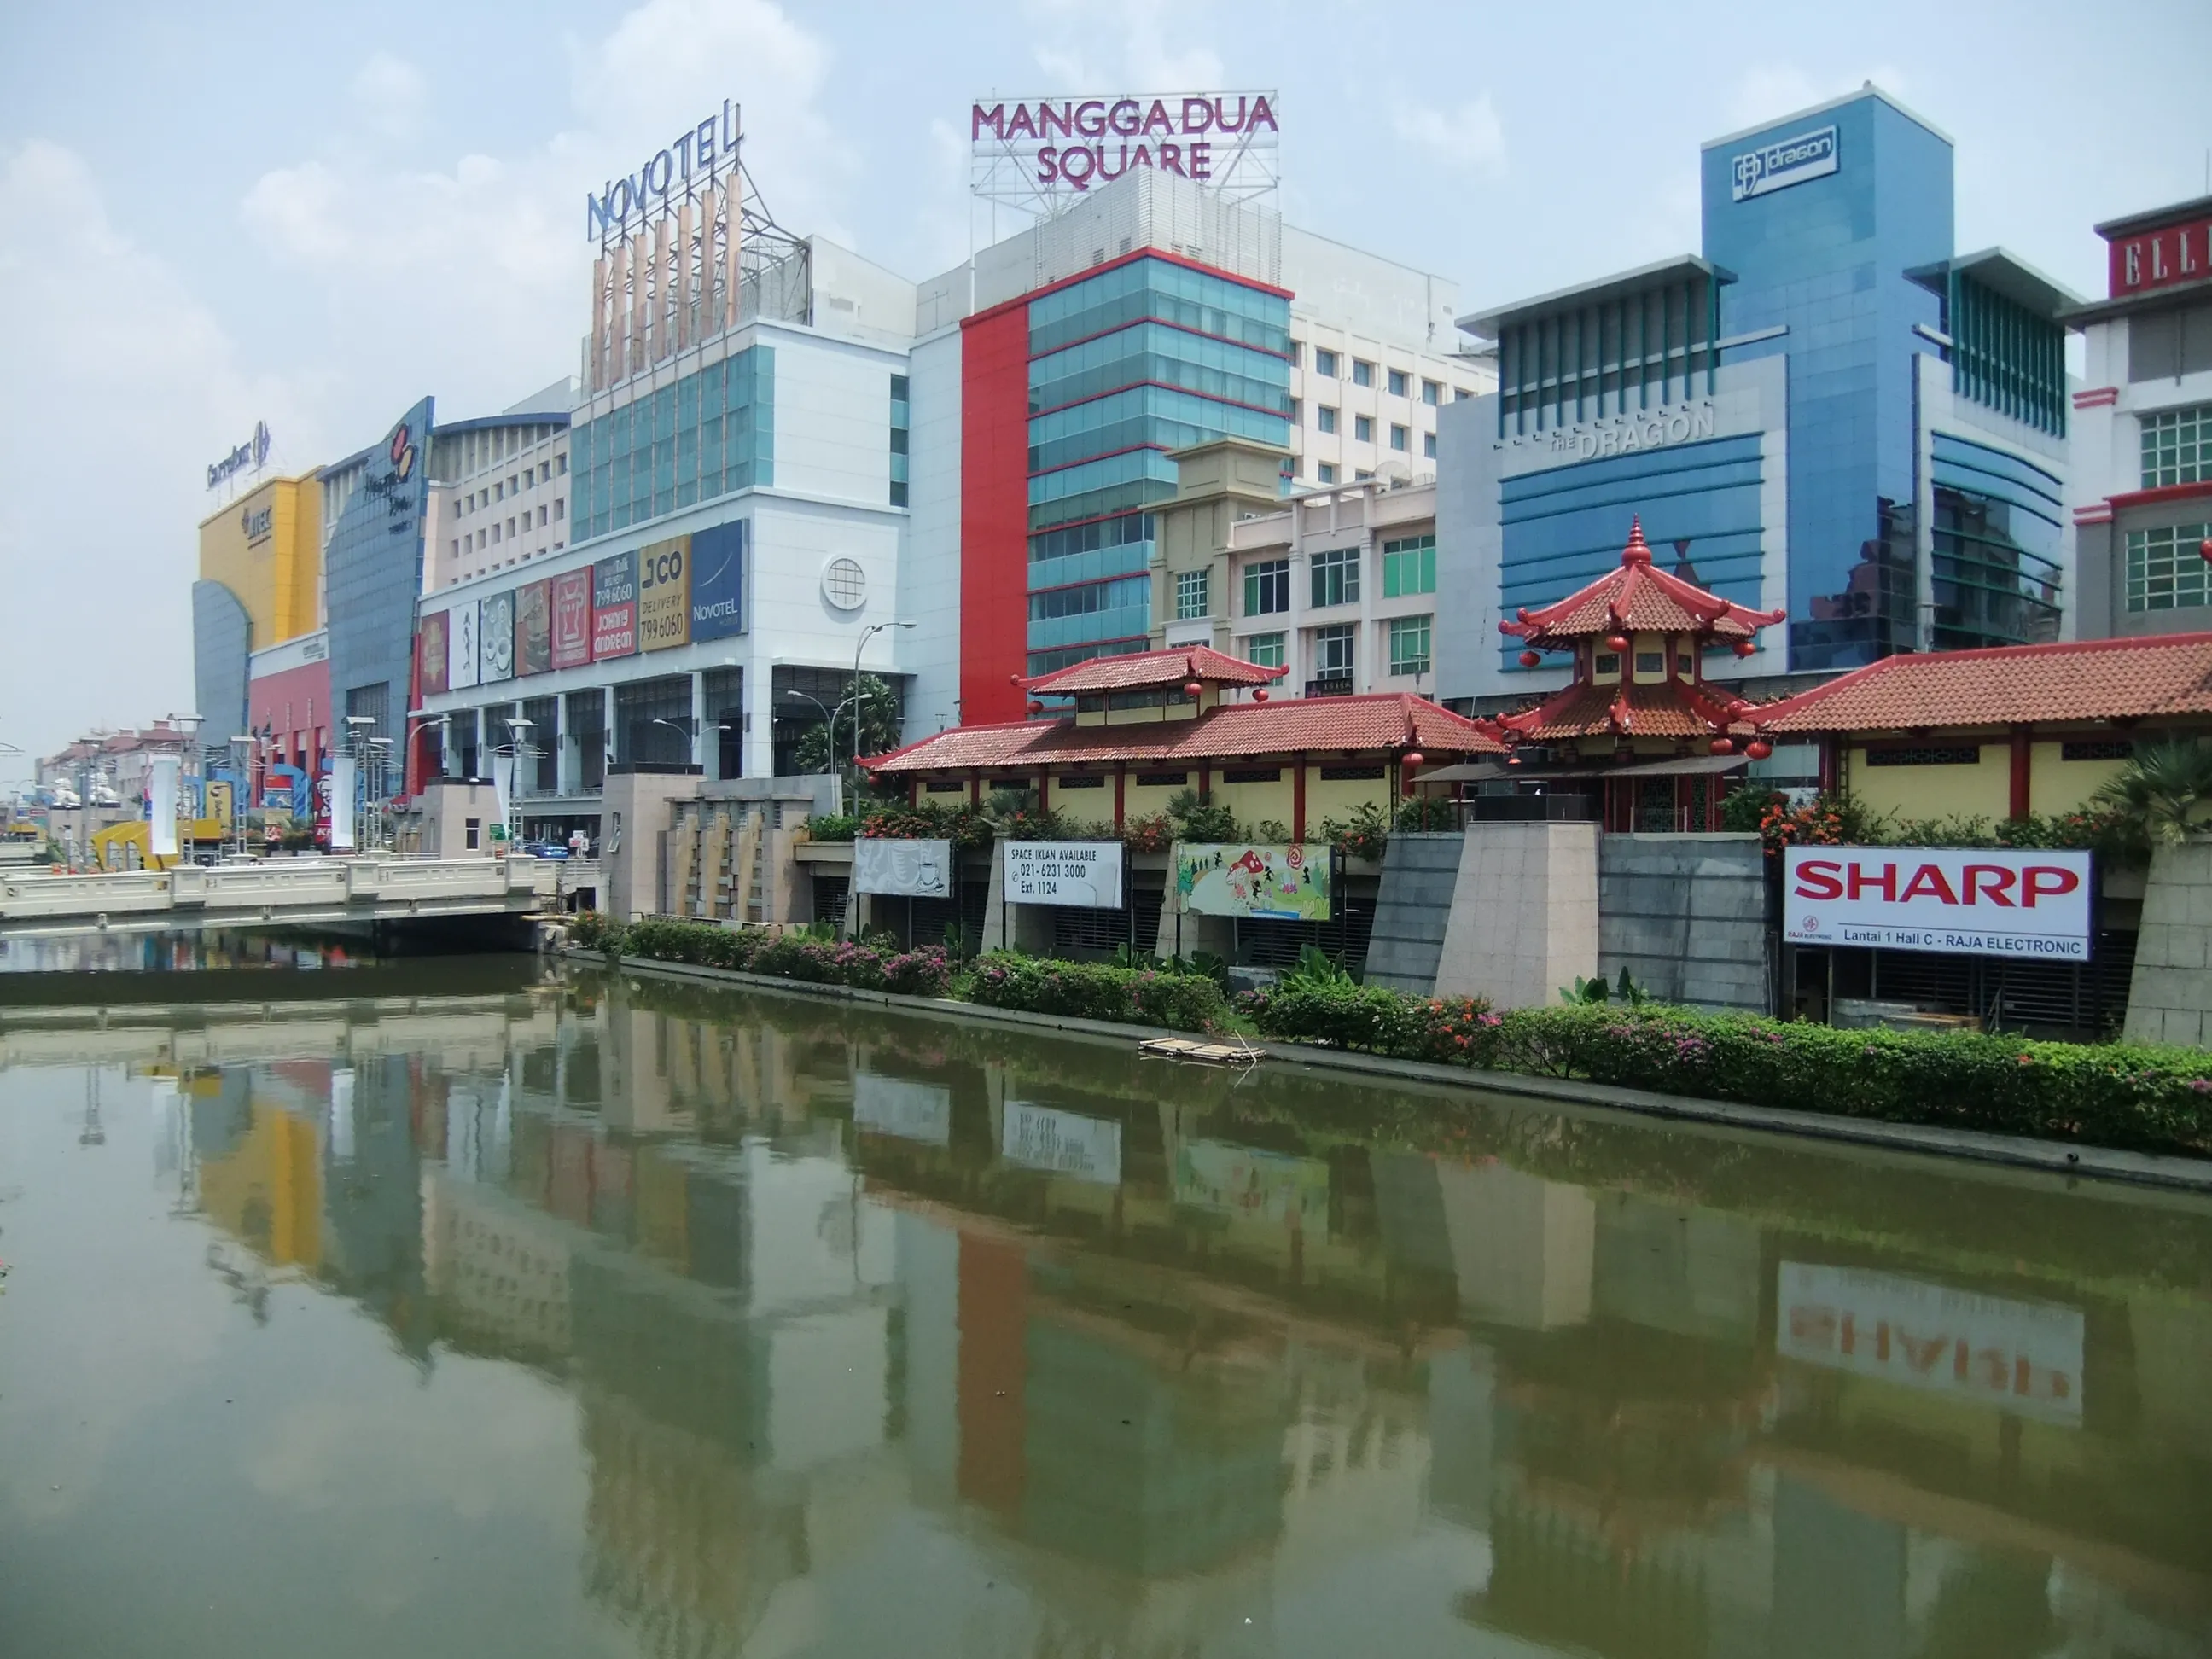 Mangga Dua Mall in Indonesia, central_asia | Handbags,Shoes,Accessories,Clothes,Home Decor - Country Helper